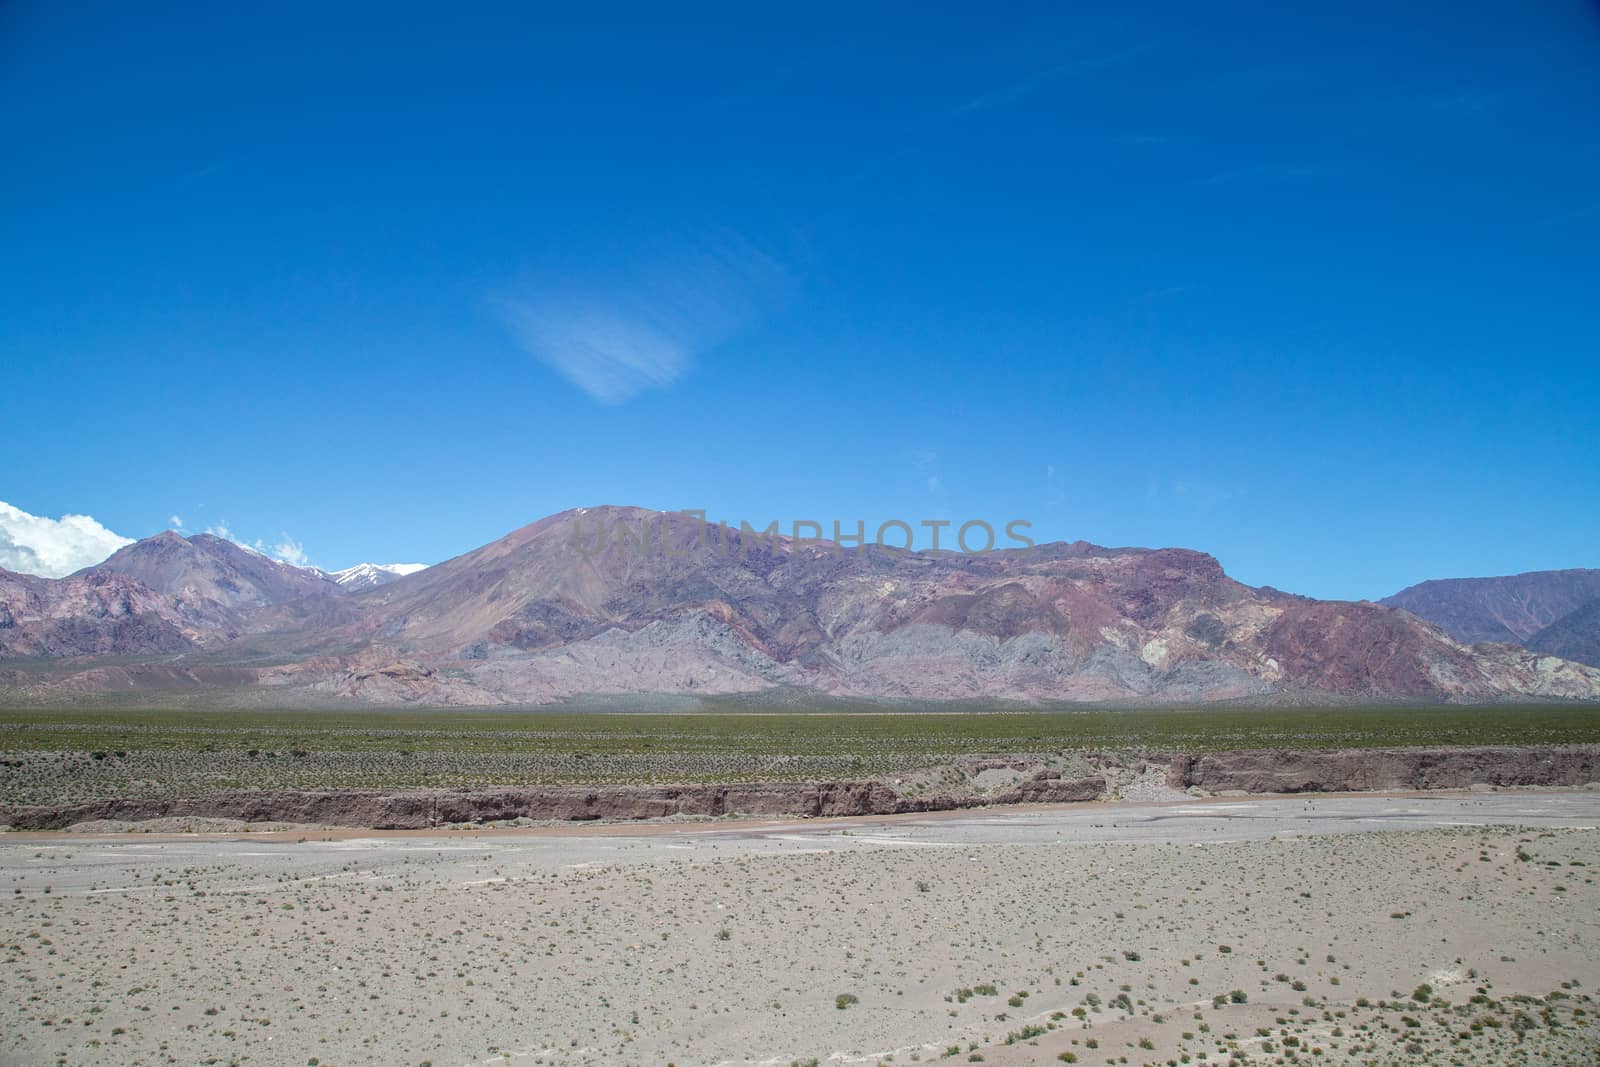 Landscape along National Route 7 through Andes mountain range in Argentina close to the border to Chile